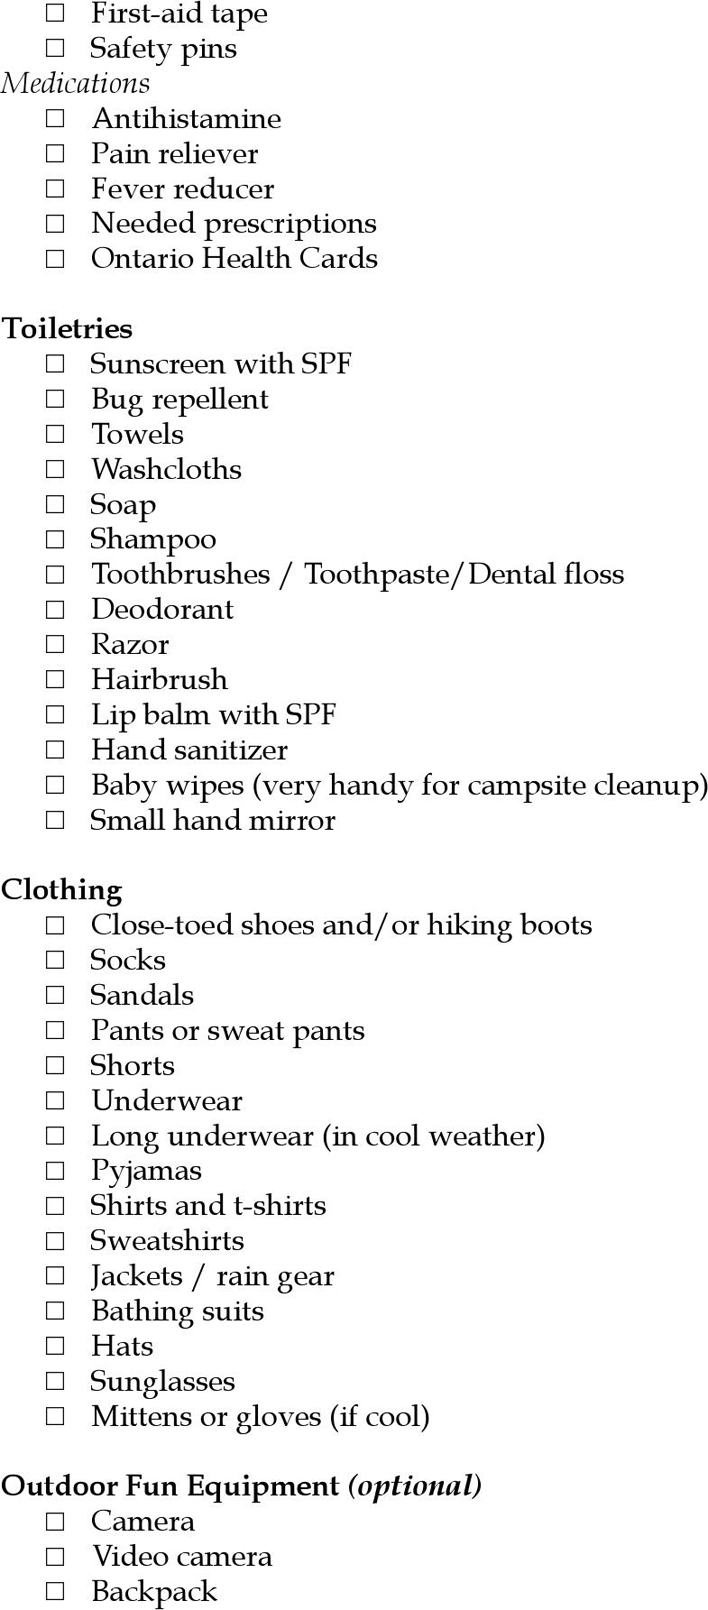 Camping Equipment Checklist Page 3